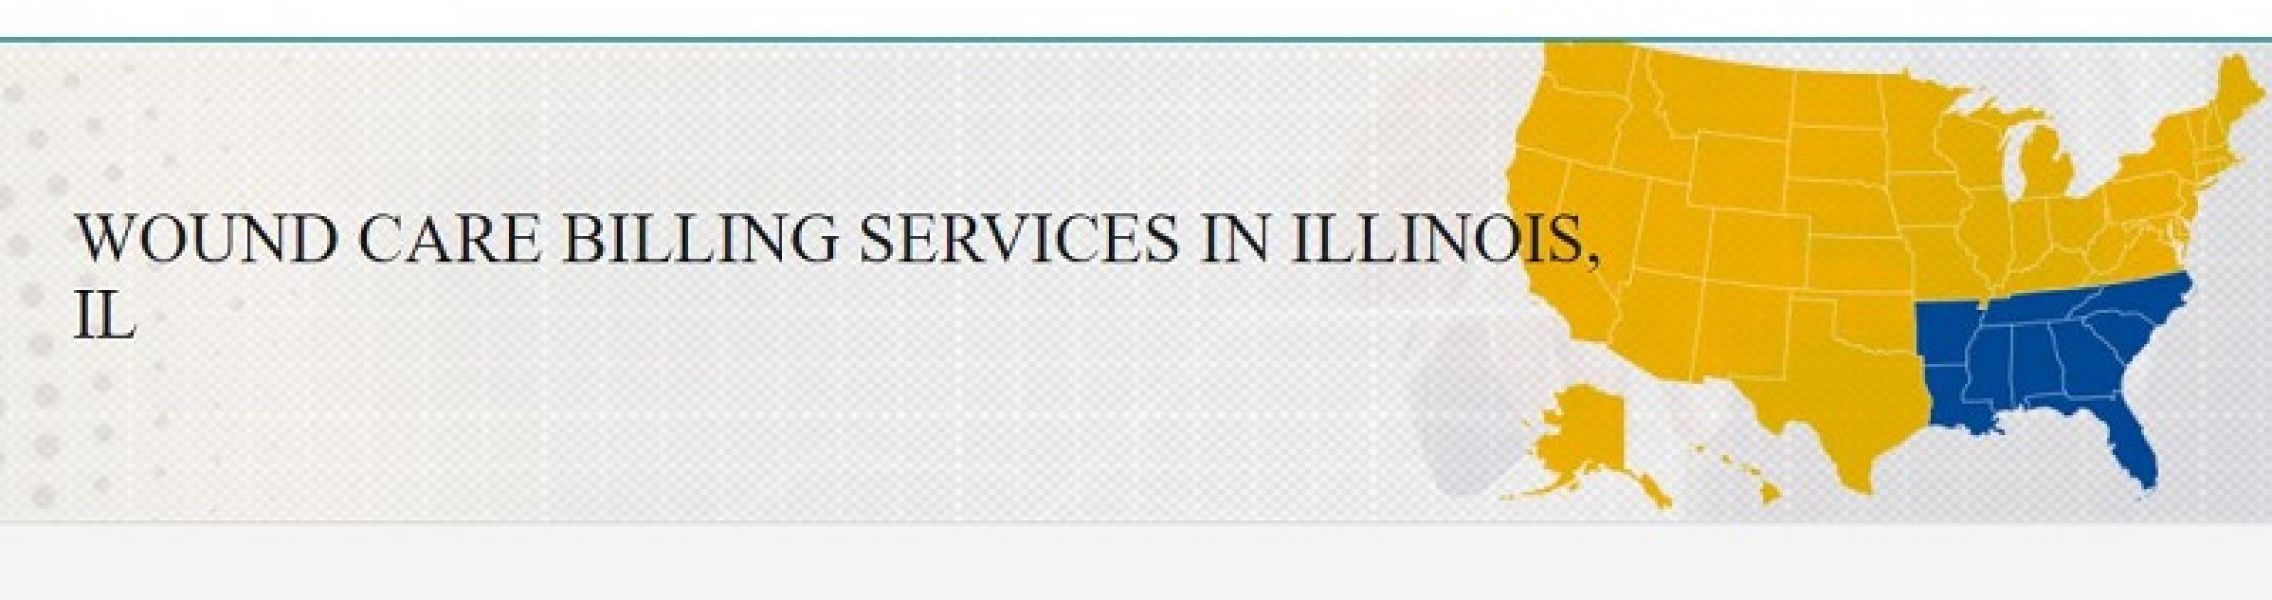 Wound Care Medical Billing Services for Illinois, IL